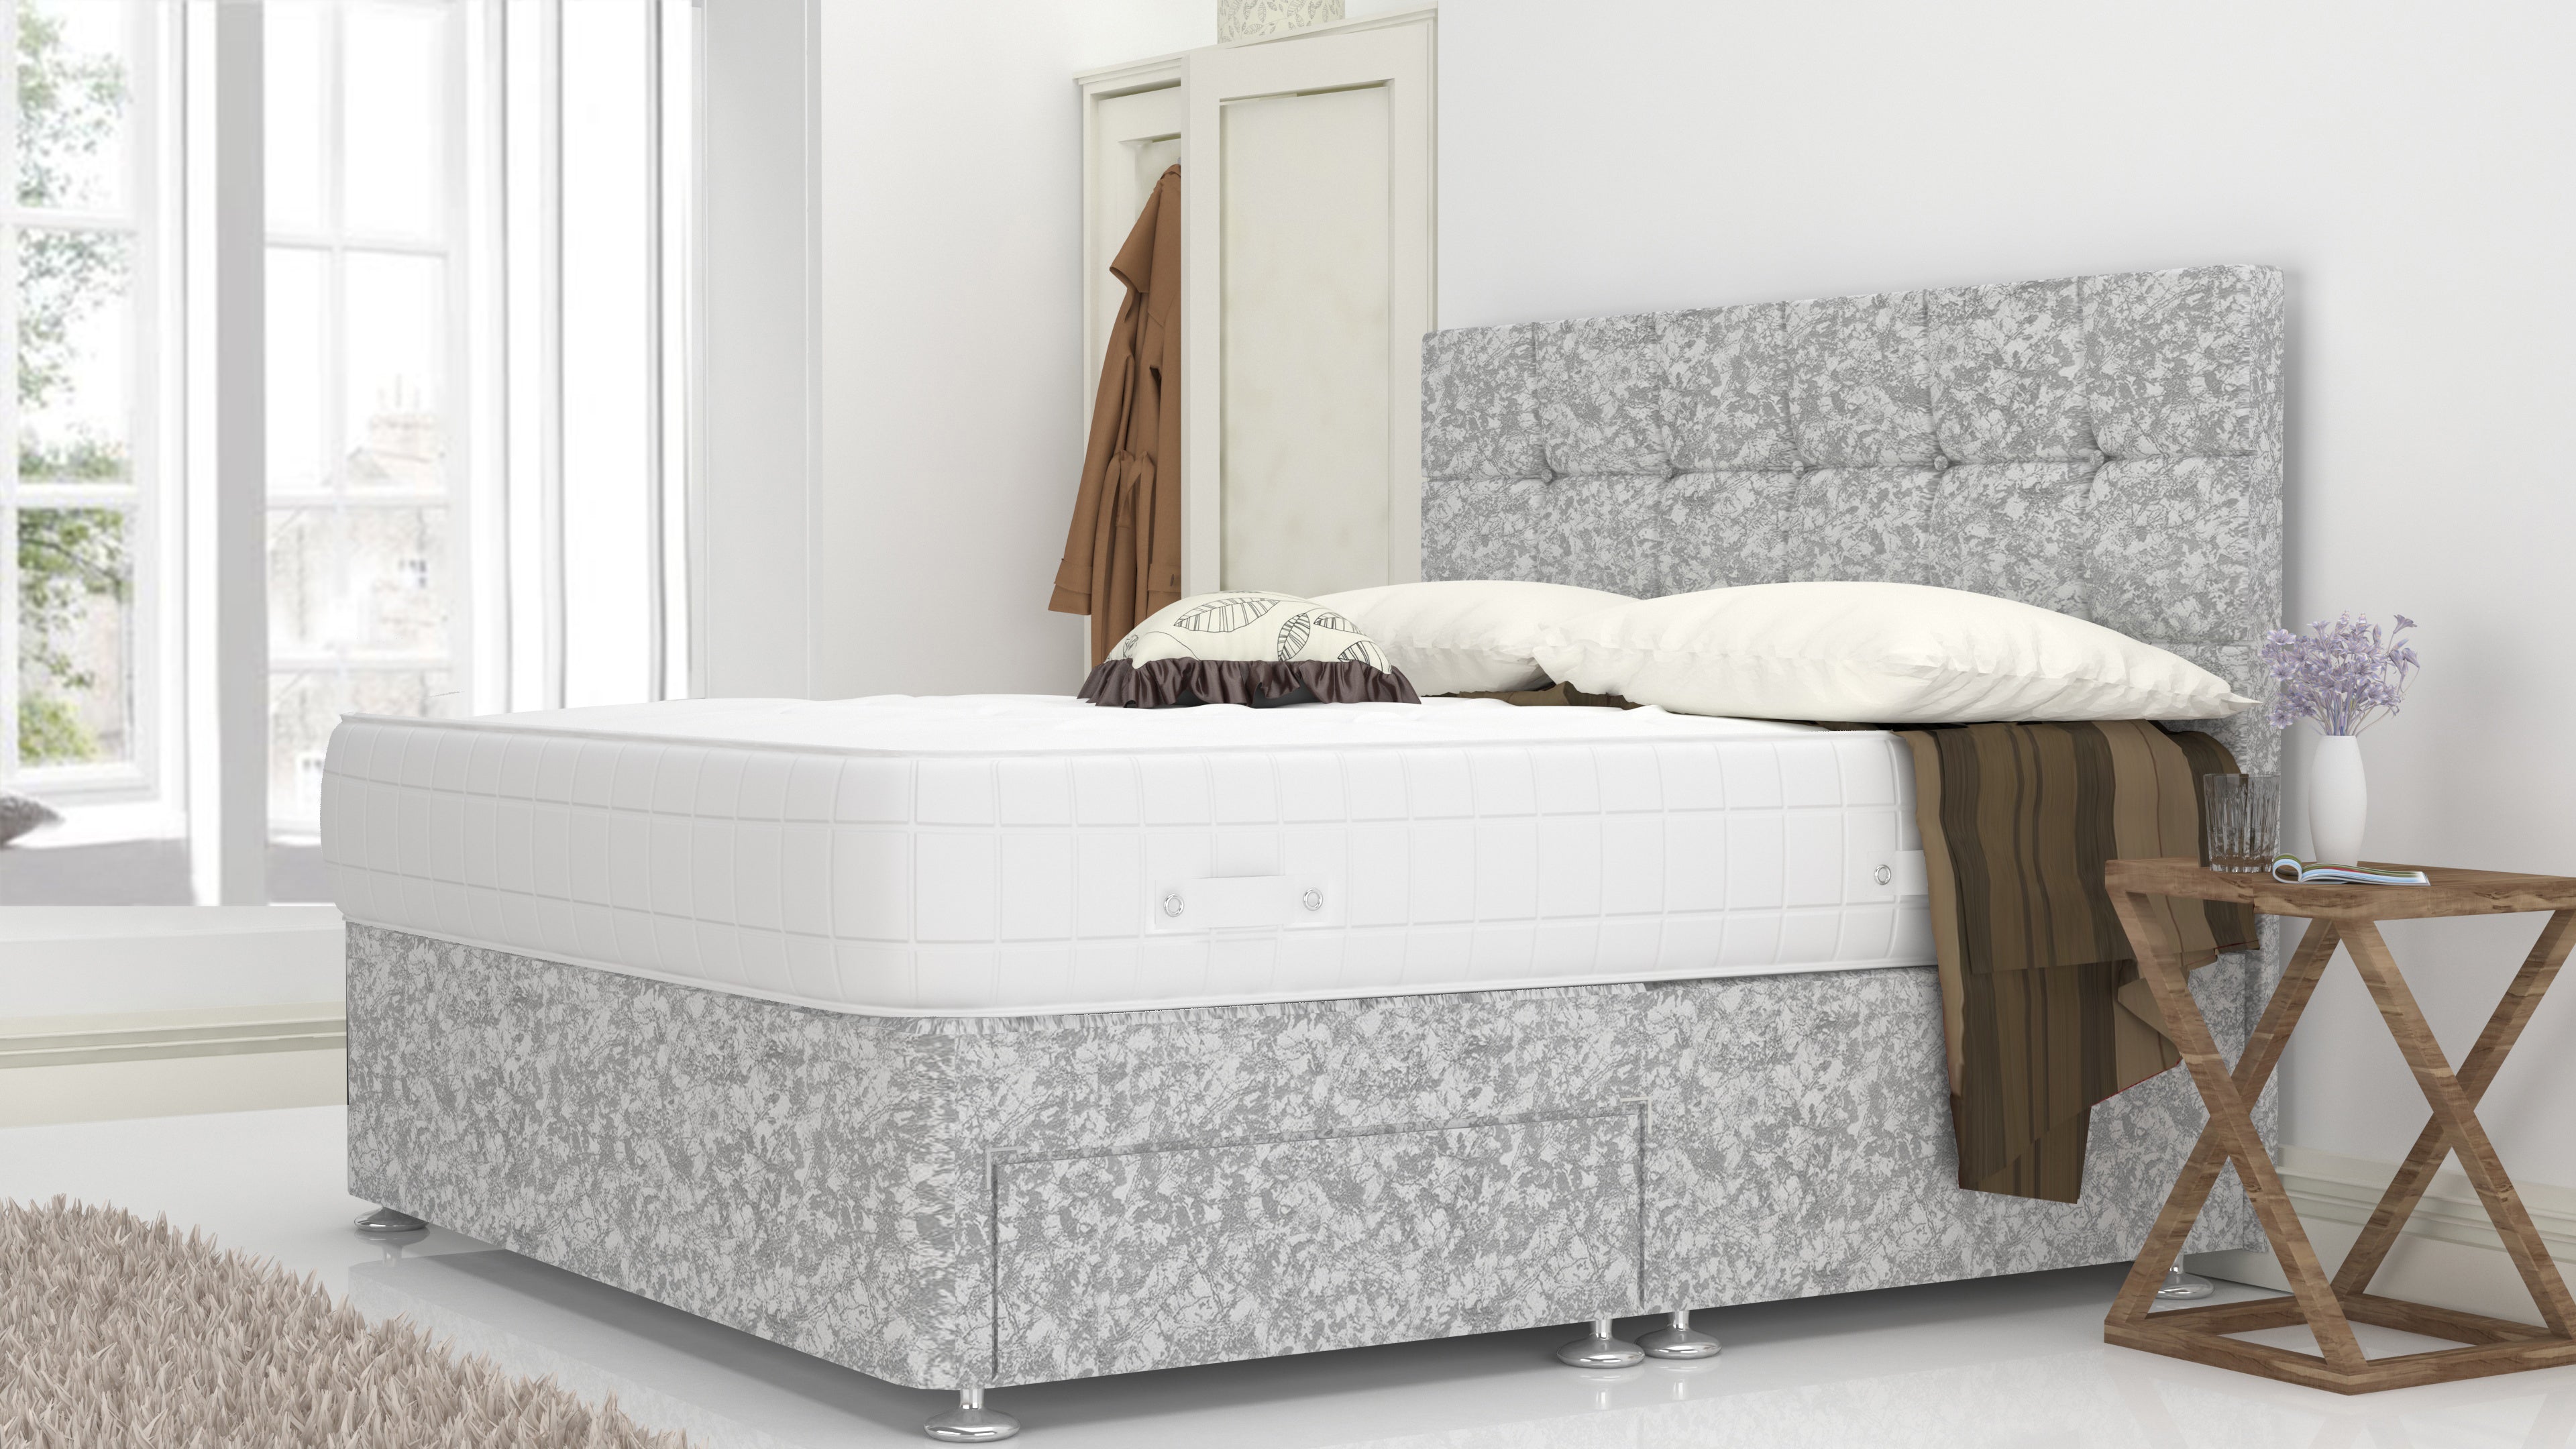 Silver Crushed 6 Feet Divan Bed Set With Cube Headboard (Included Feet) And Free Orthopedic Mattress